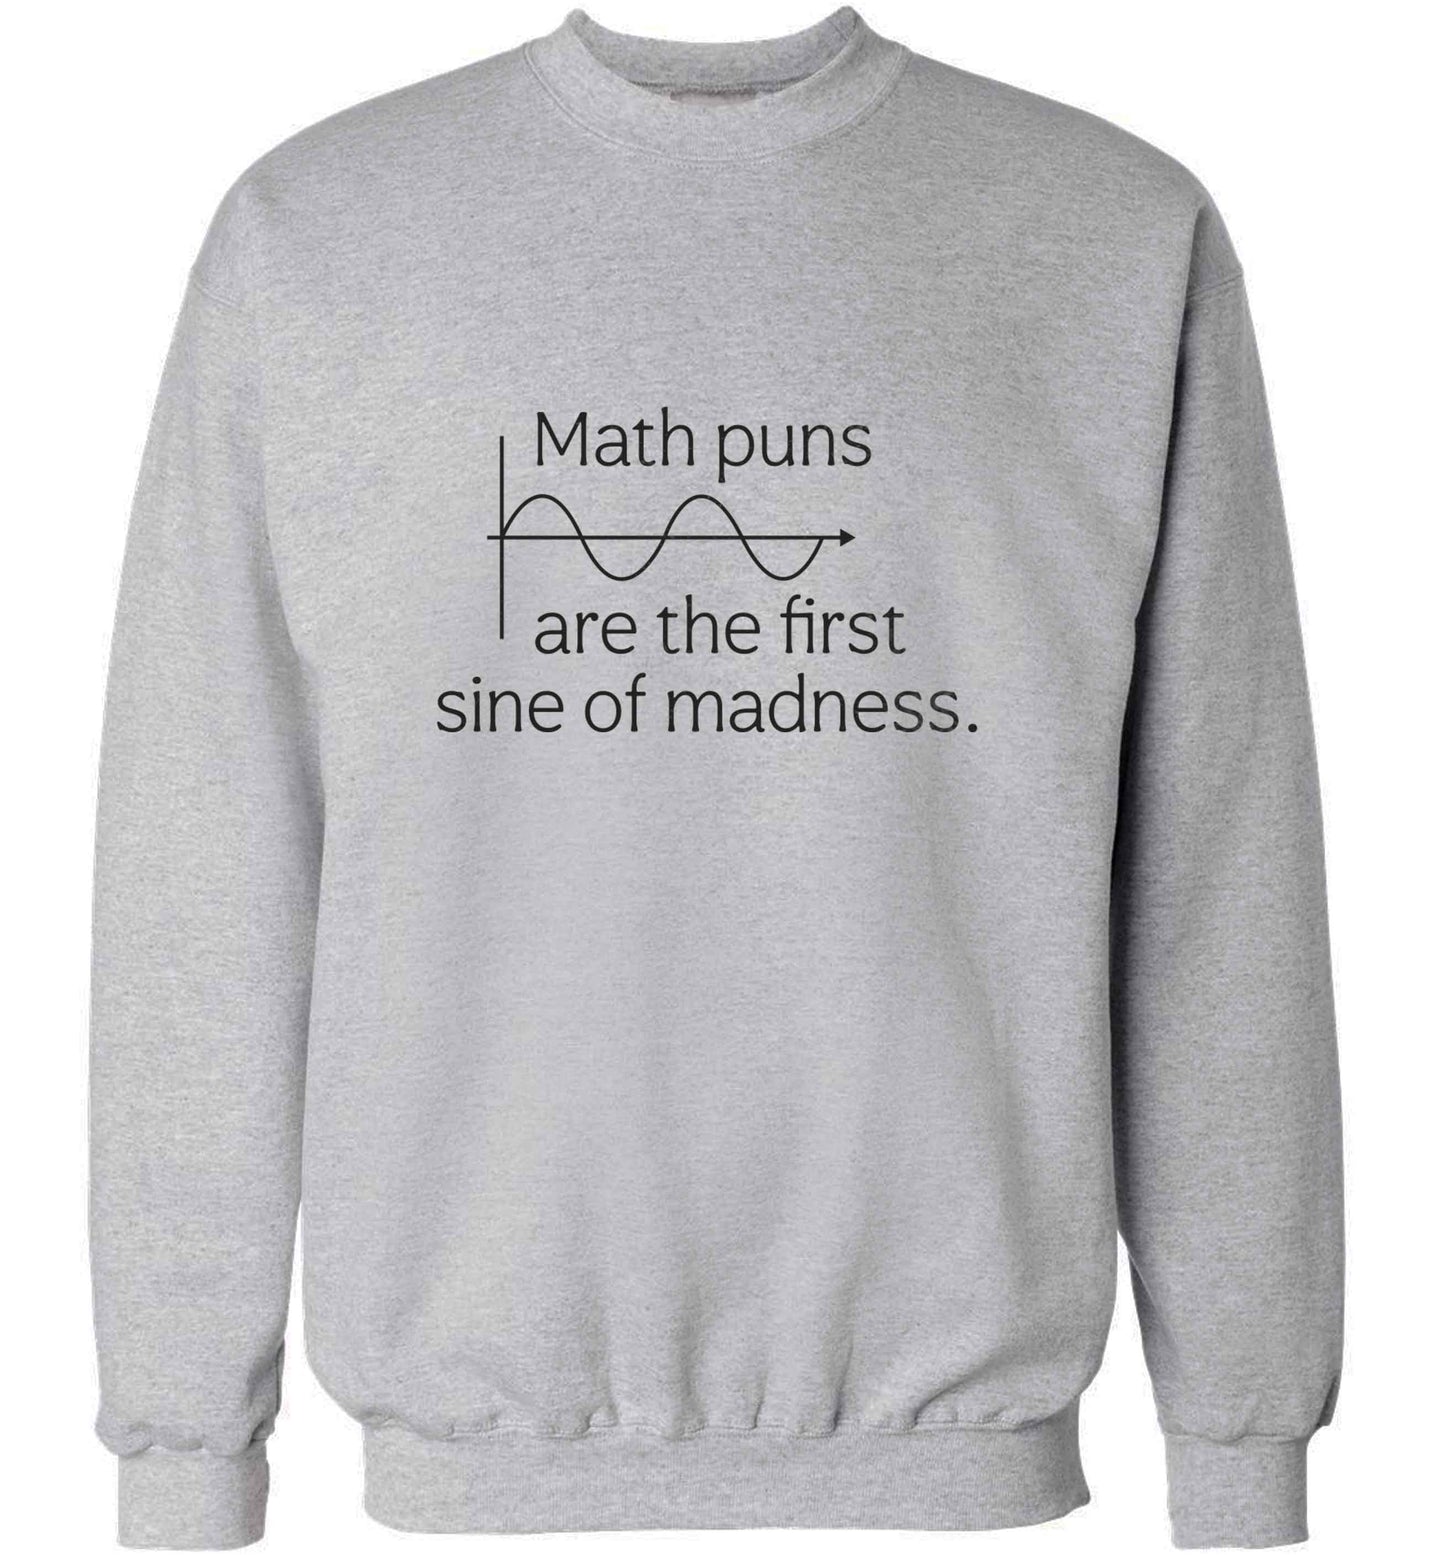 Math puns are the first sine of madness adult's unisex grey sweater 2XL